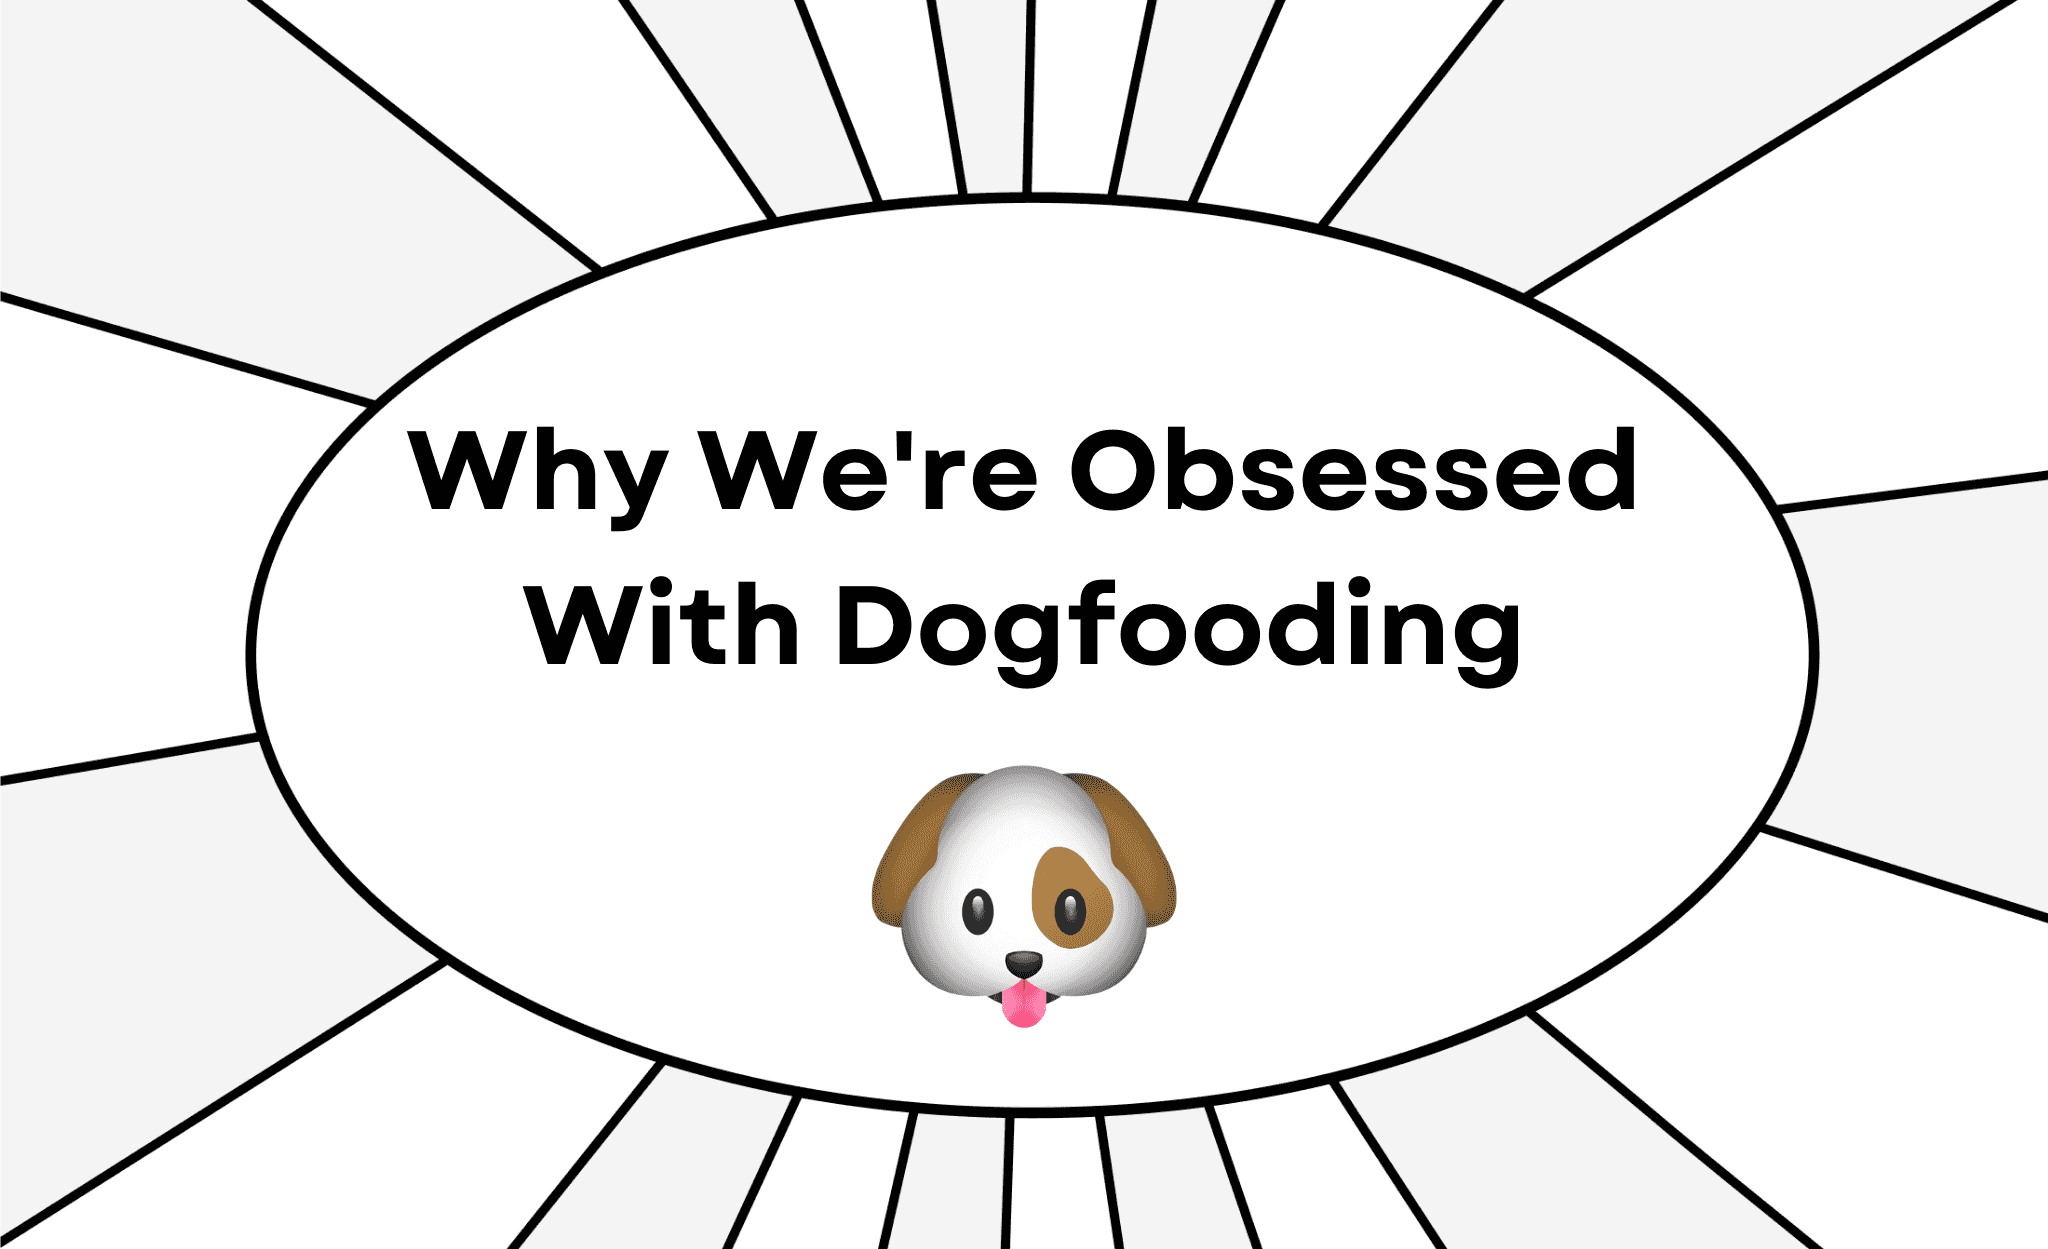 Why you should be obsessed with dogfooding